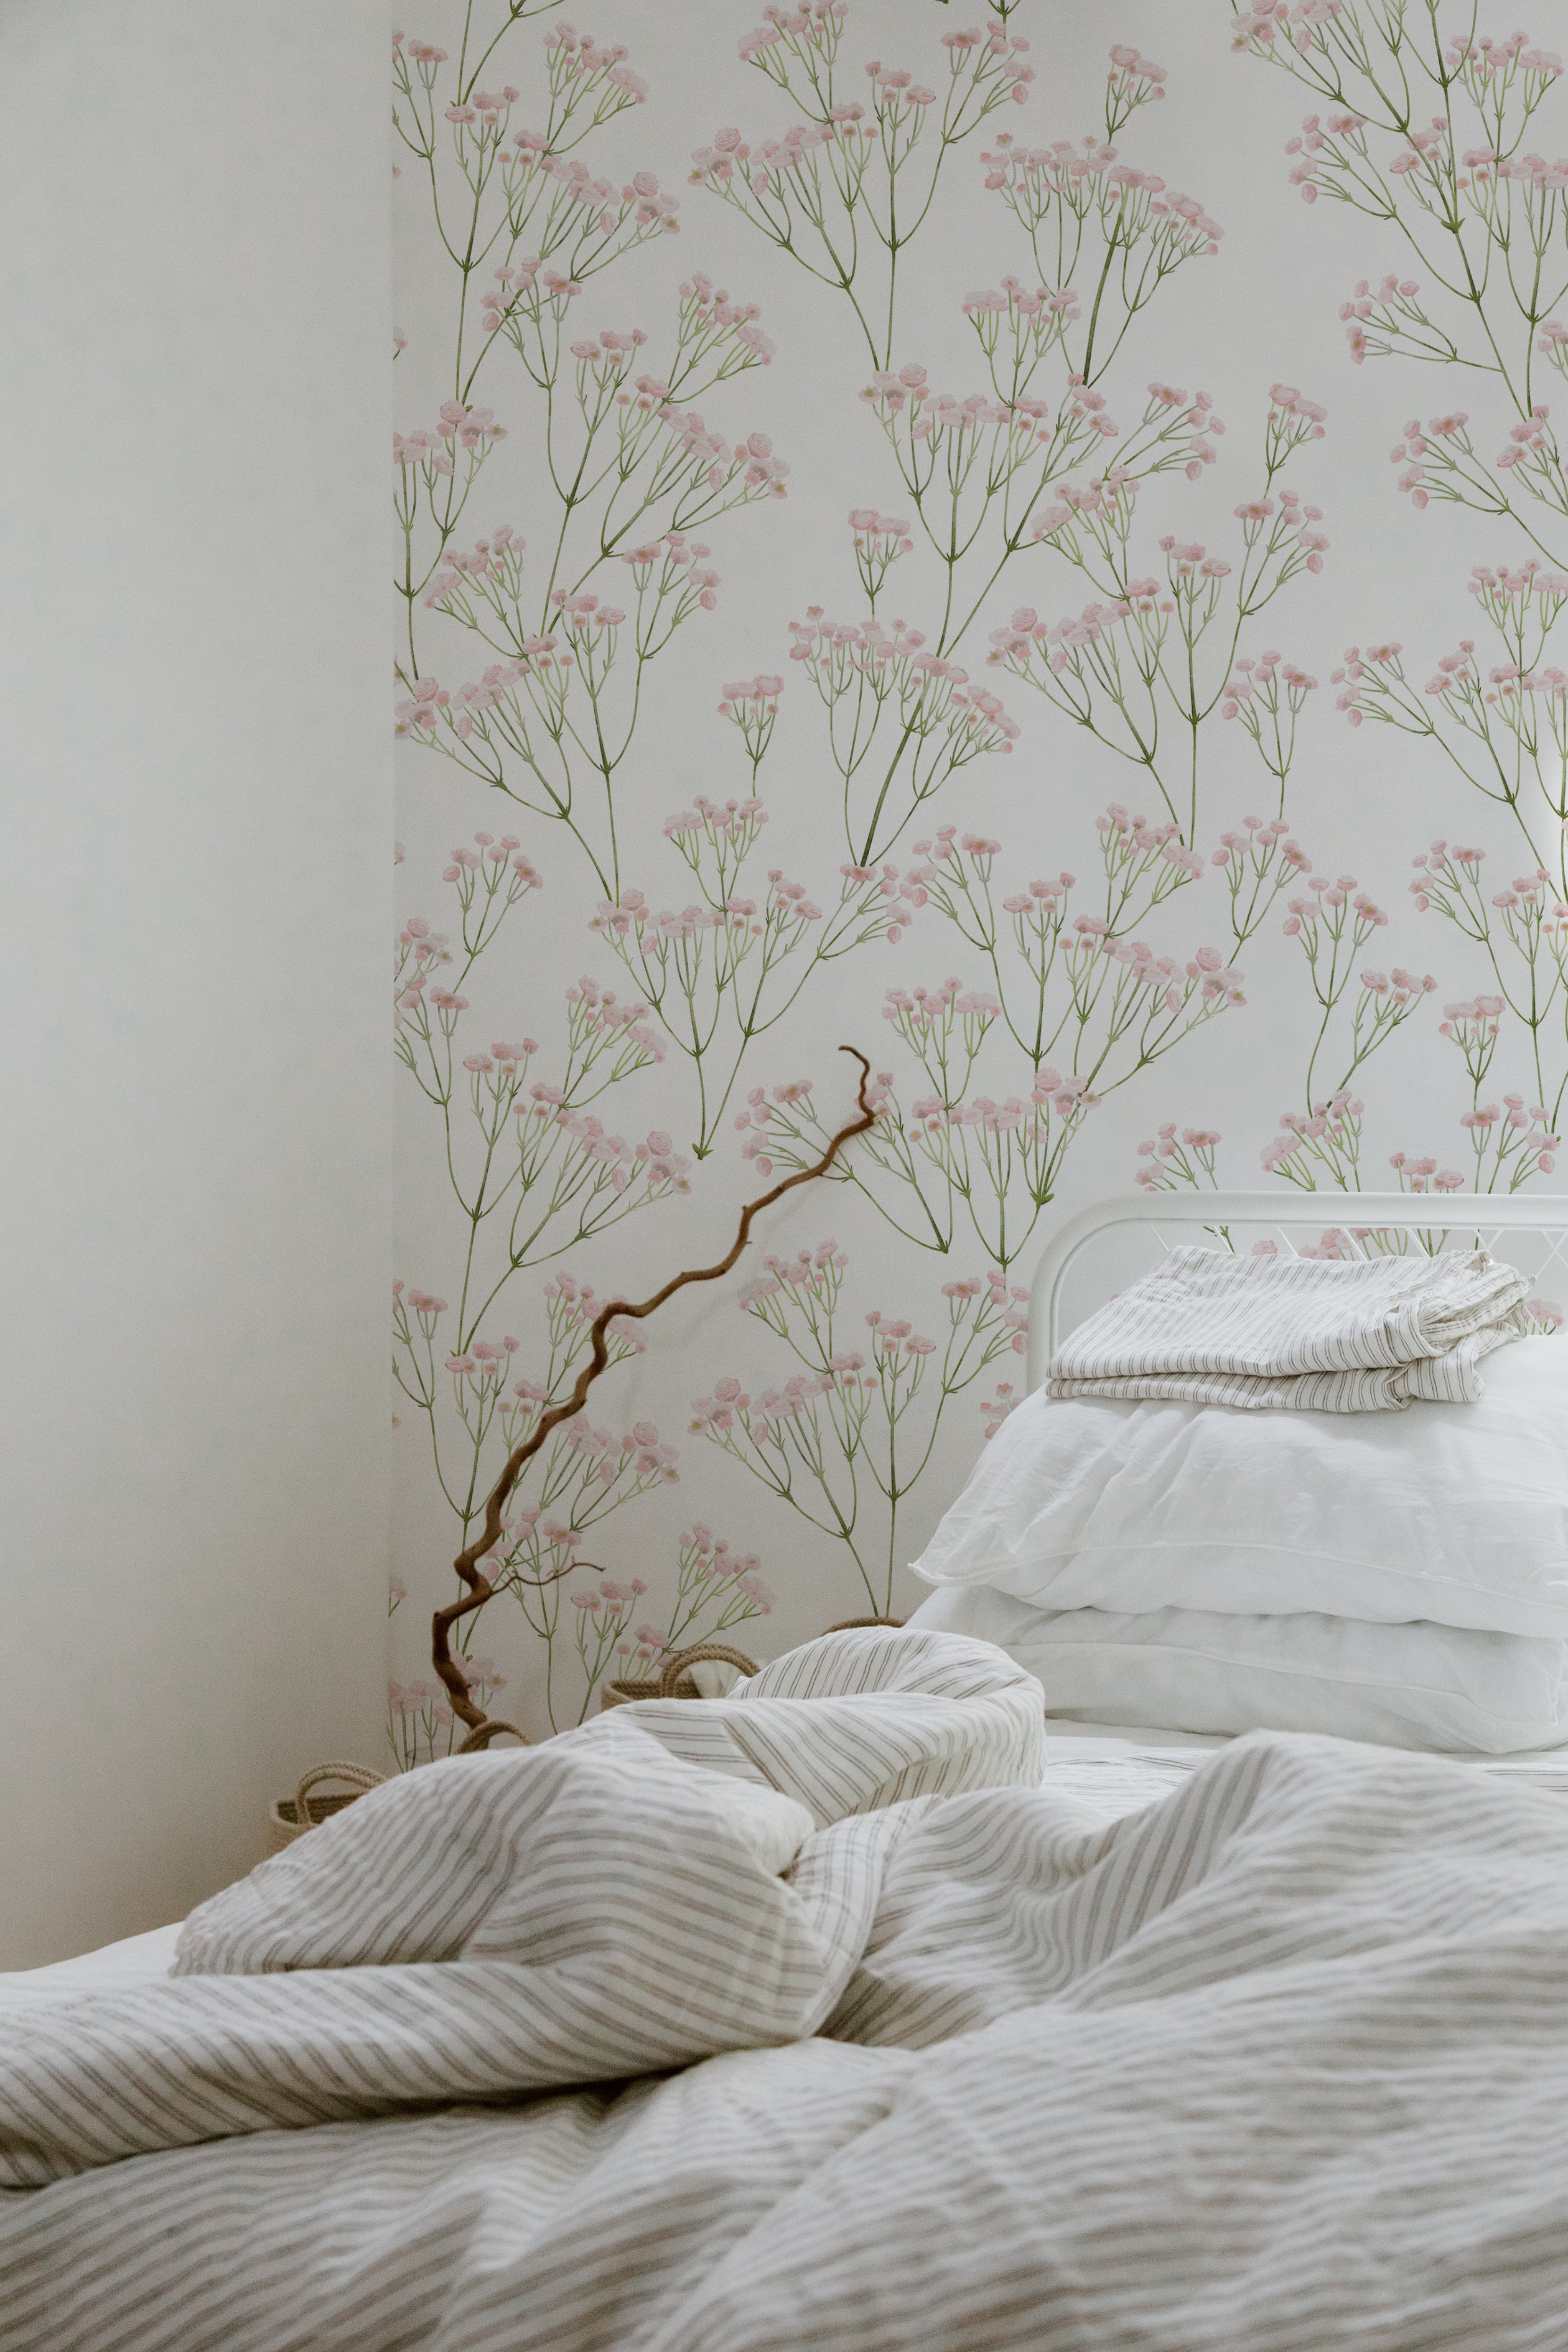 A tranquil bedroom setting displaying the Le Marchand de Fleurs Wallpaper - 75", where the wallpaper’s light pink flowers and green stems enhance the soothing atmosphere, complementing the simple white bedding and natural light.